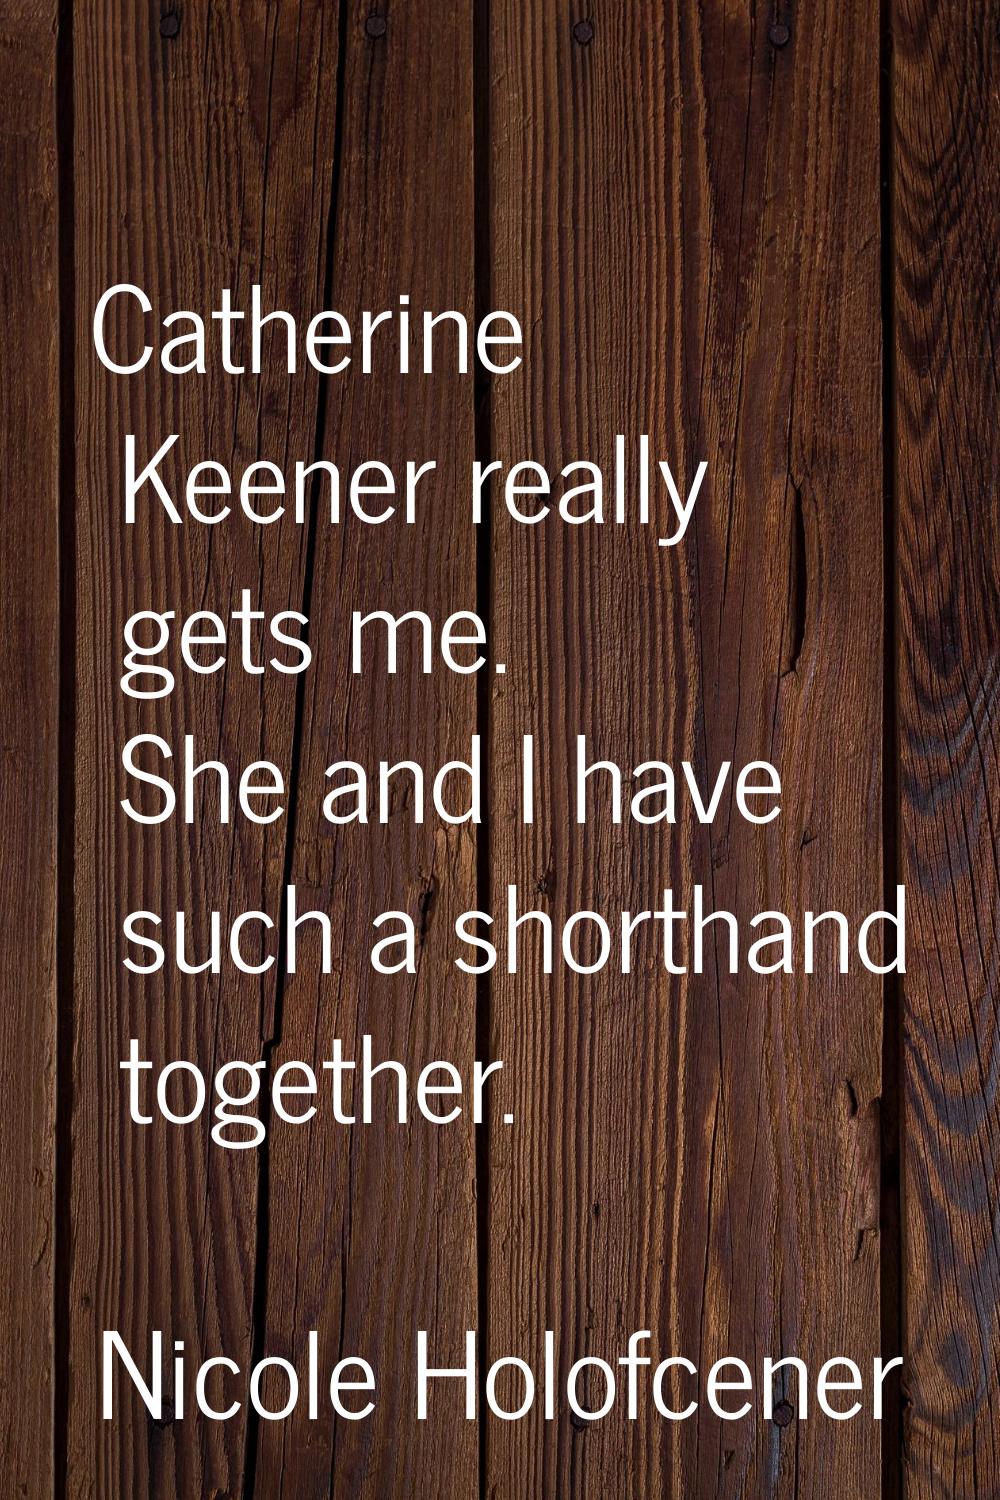 Catherine Keener really gets me. She and I have such a shorthand together.